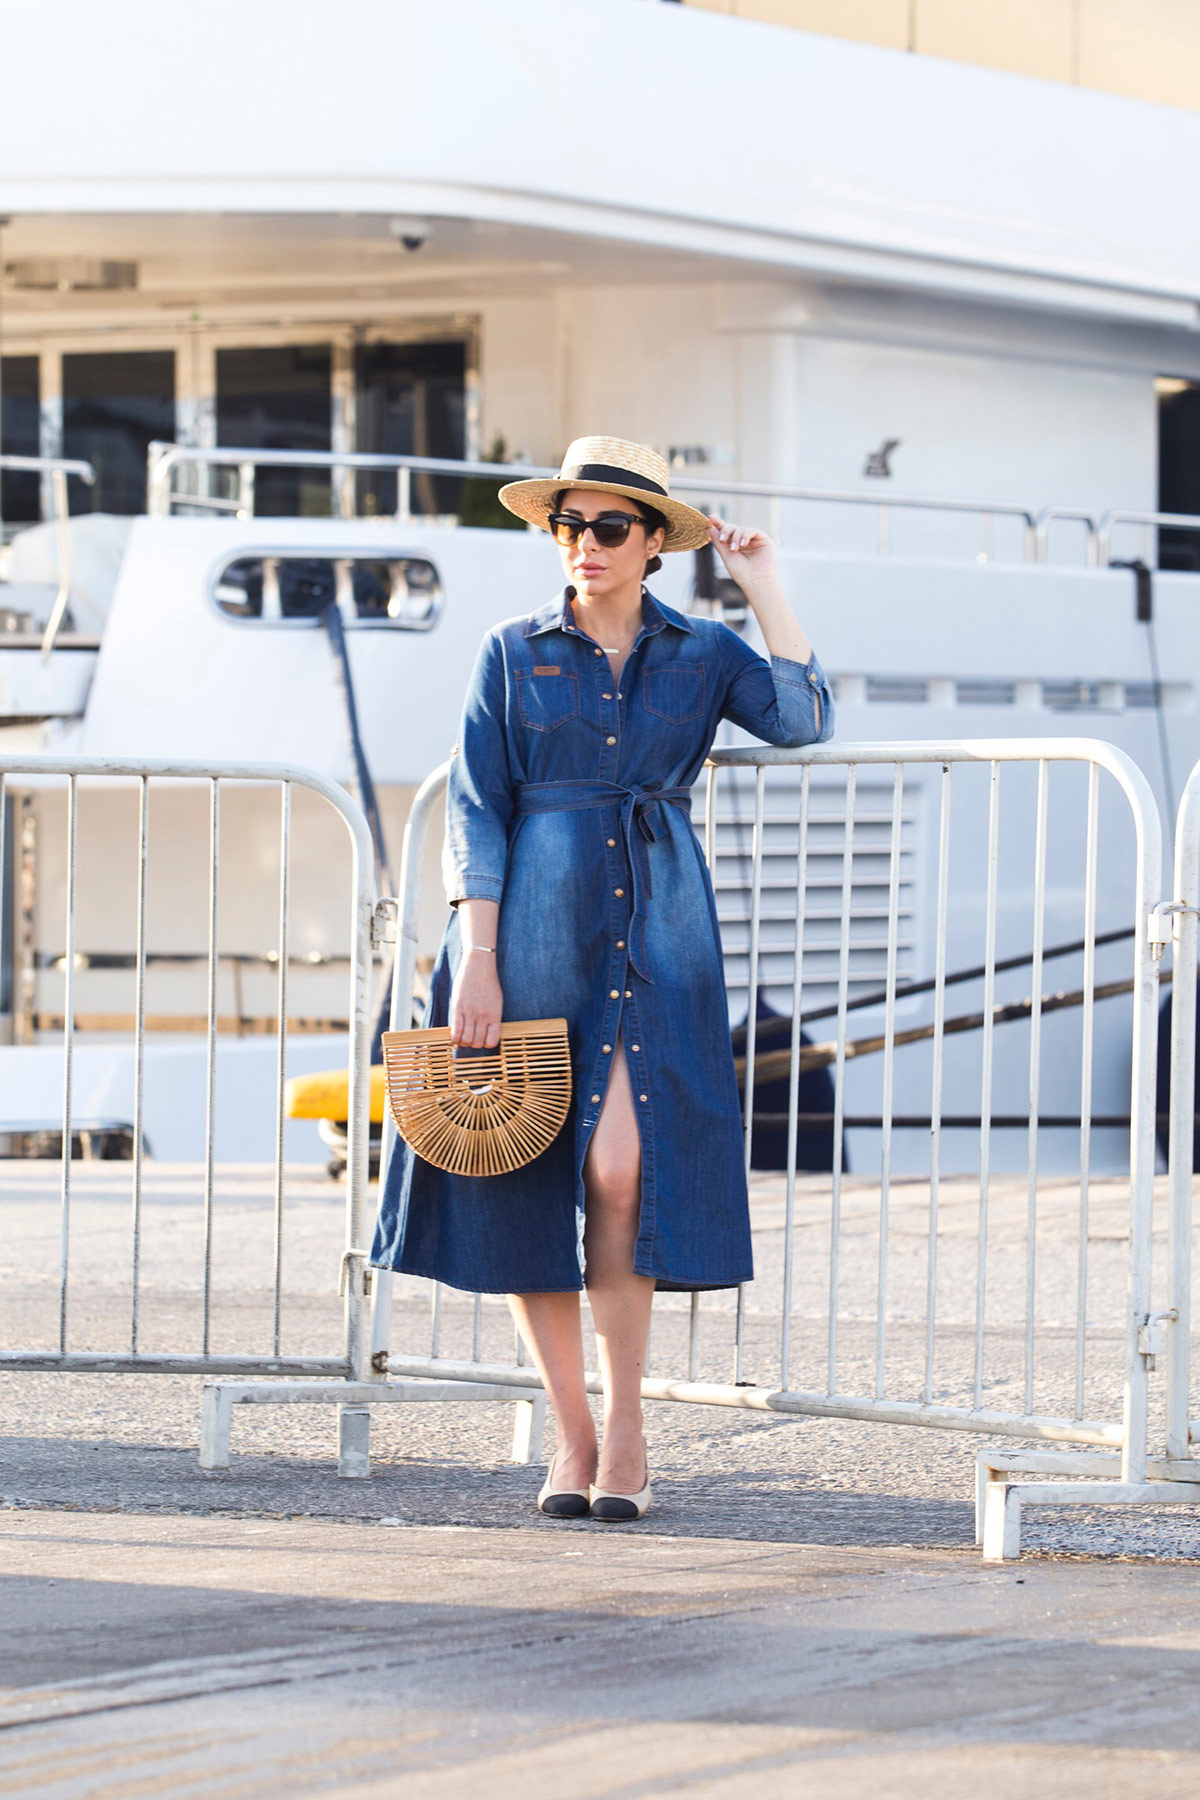 Cruise Chic Style with Denim Dress & Chanel Slingbacks from Stella Asteria